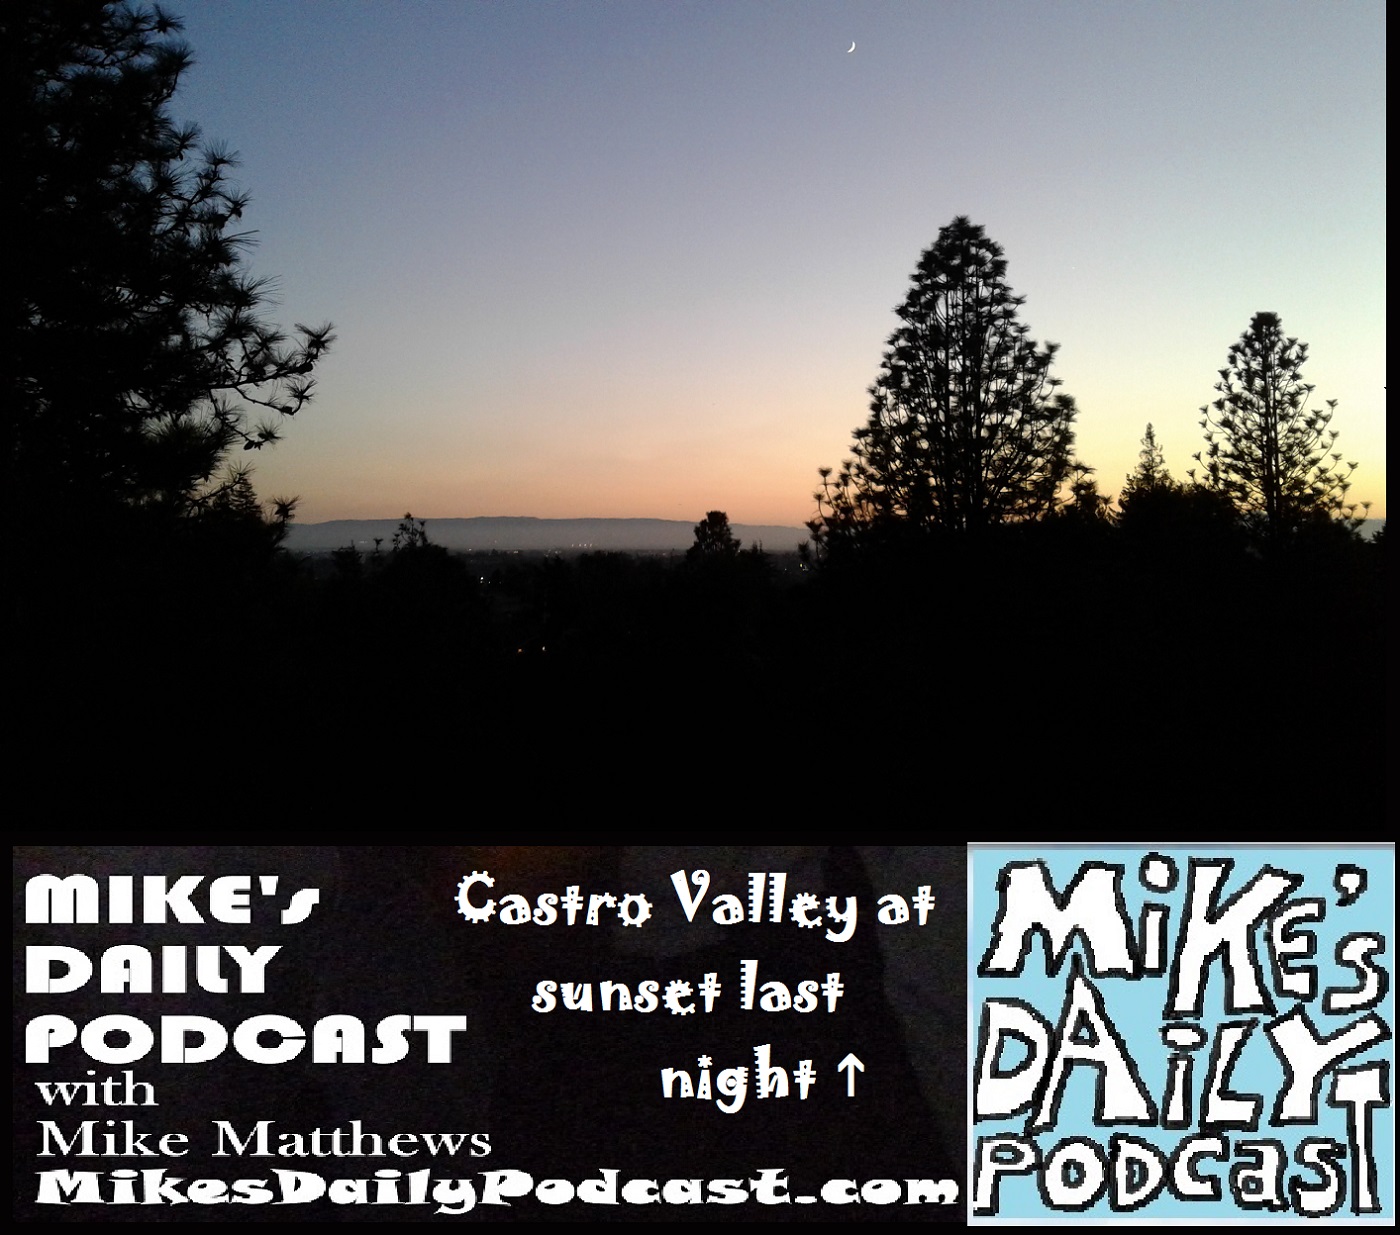 mikes-daily-podcast-1189-castro-valley-sunset